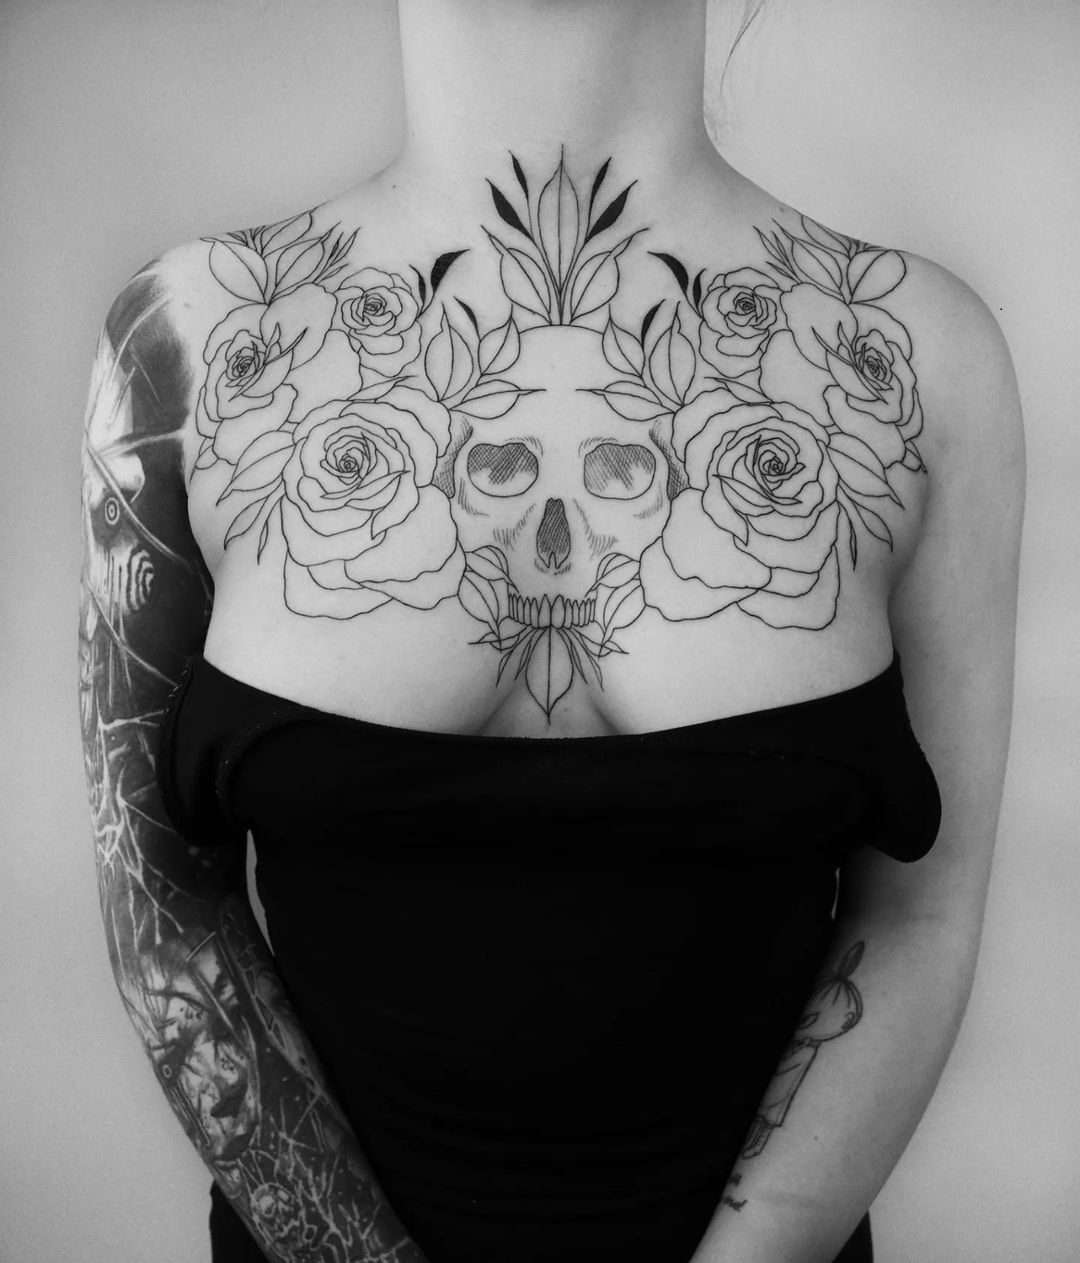 How much is a chest piece tattoo